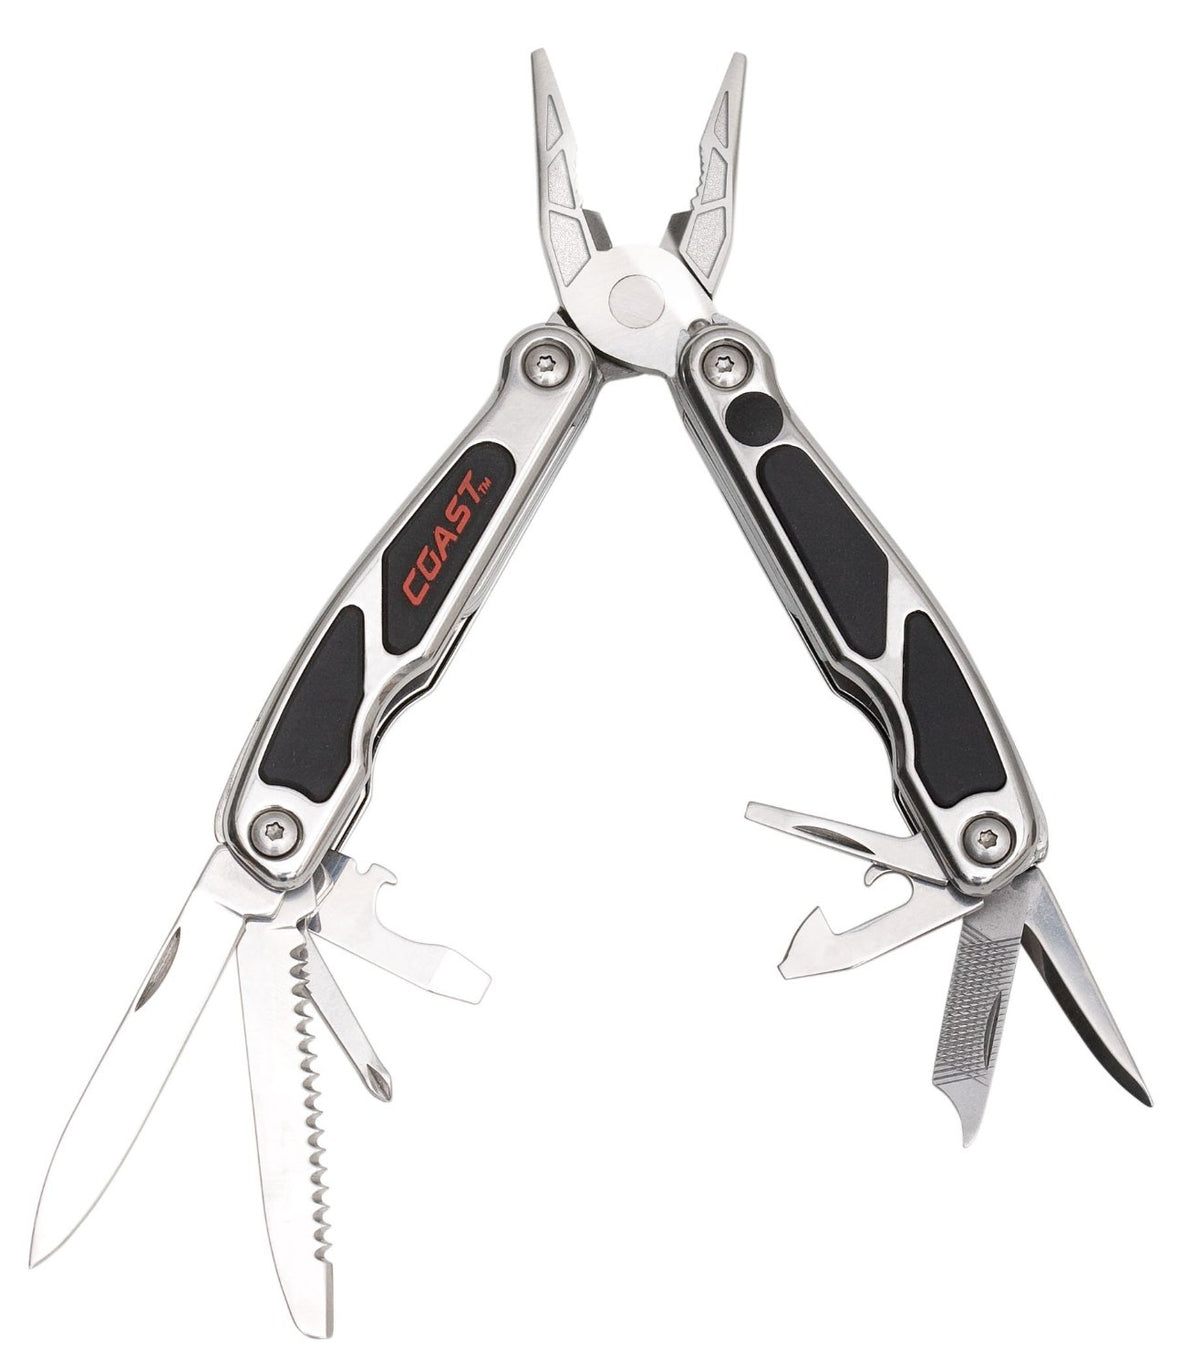 buy outdoor multitools at cheap rate in bulk. wholesale & retail camping tools & essentials store.